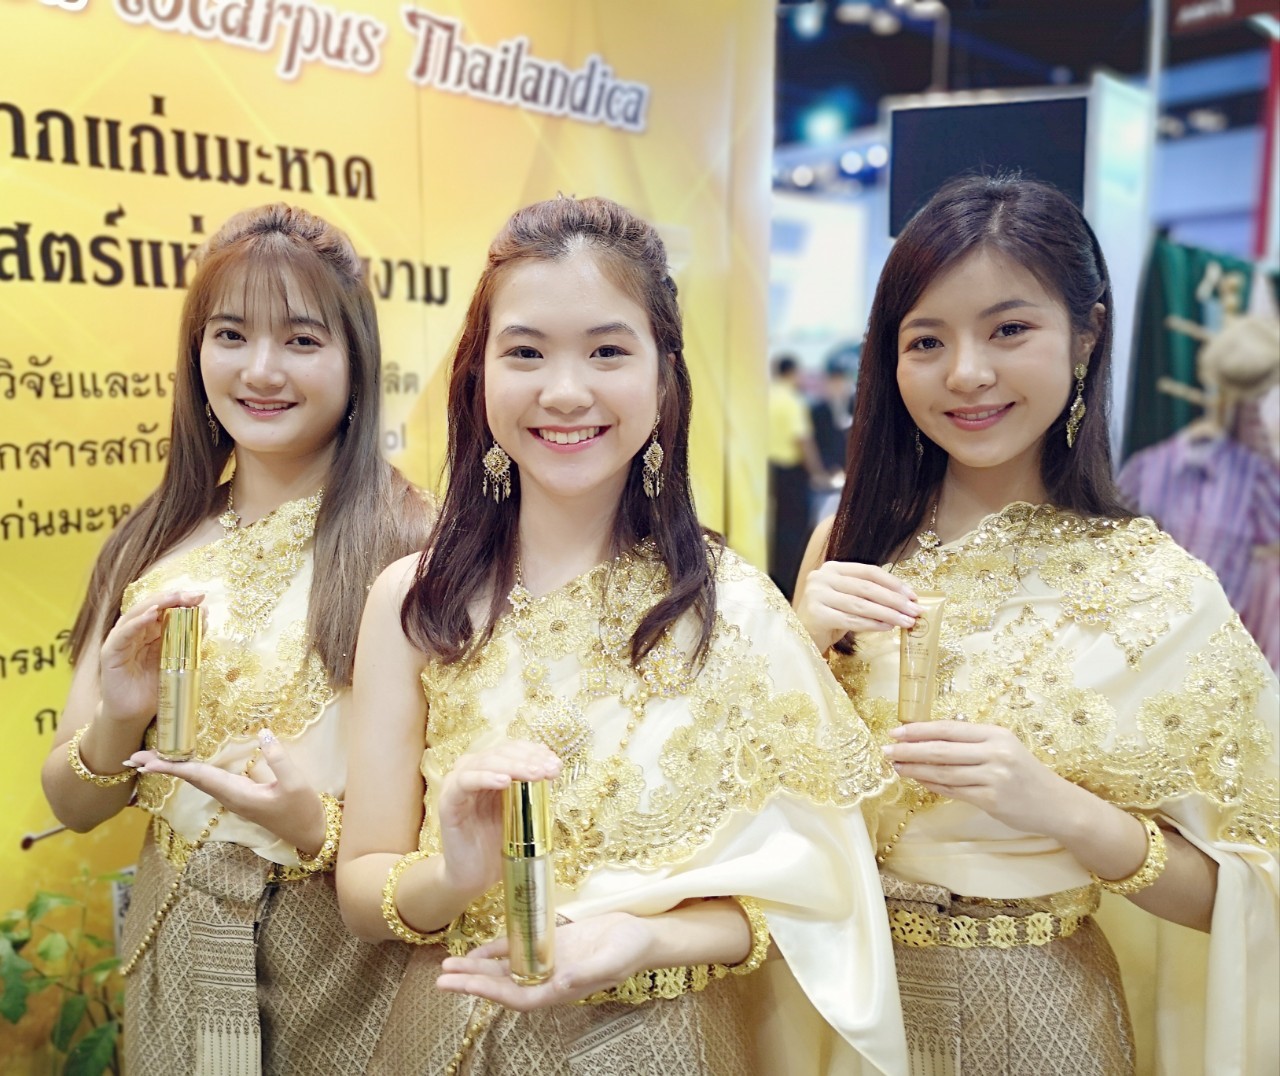 Getting Award in Thailand Research Expo 